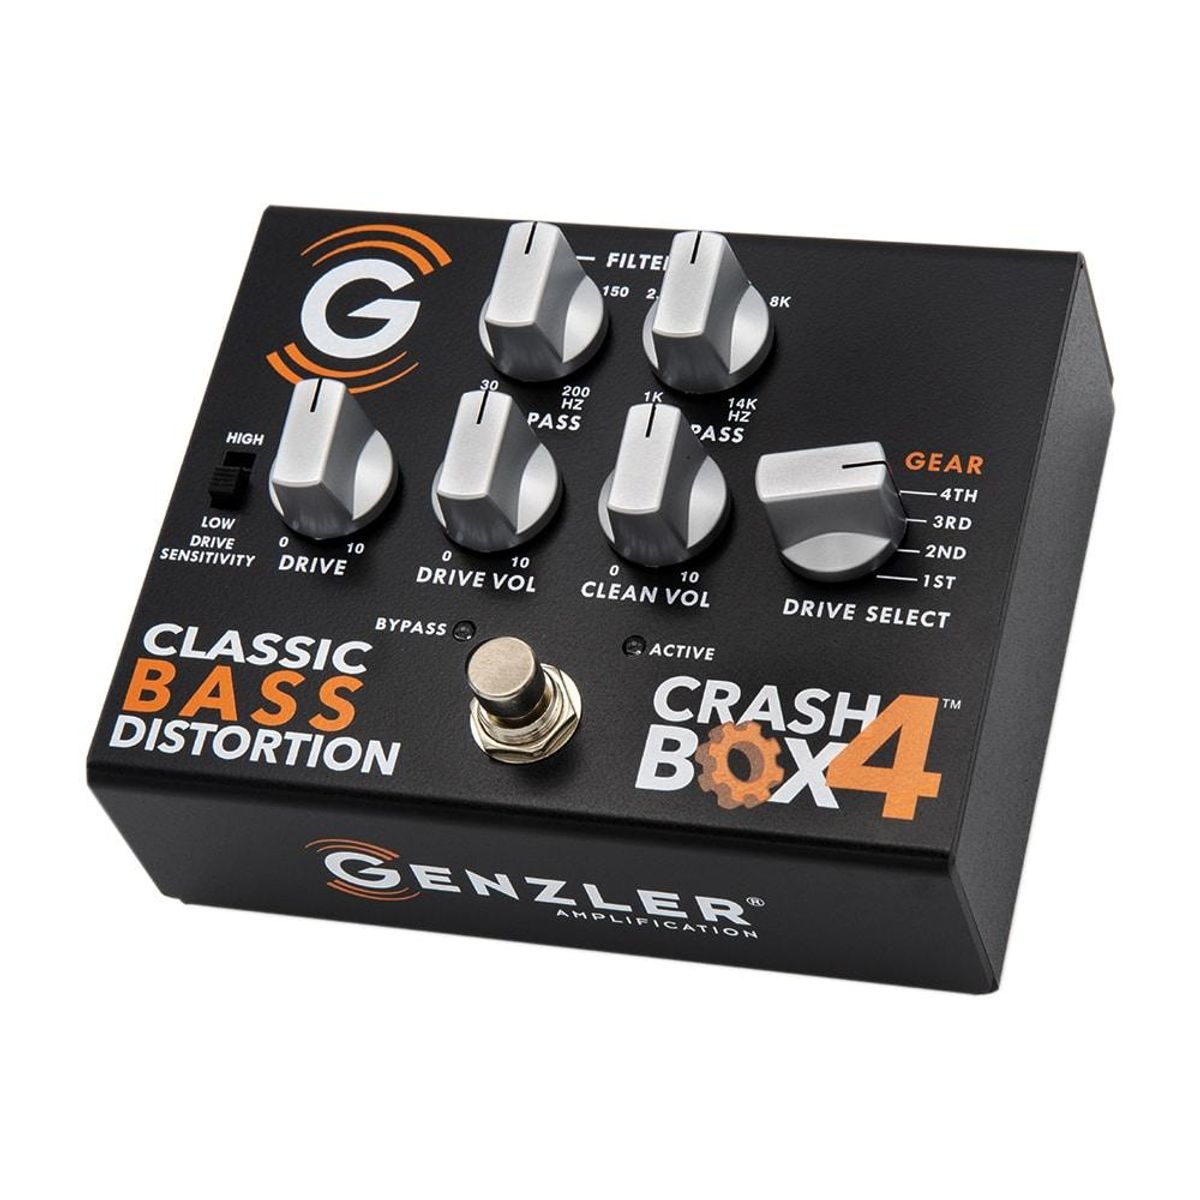 Genzler Amplification Launches the Crash Box 4 Bass Distortion